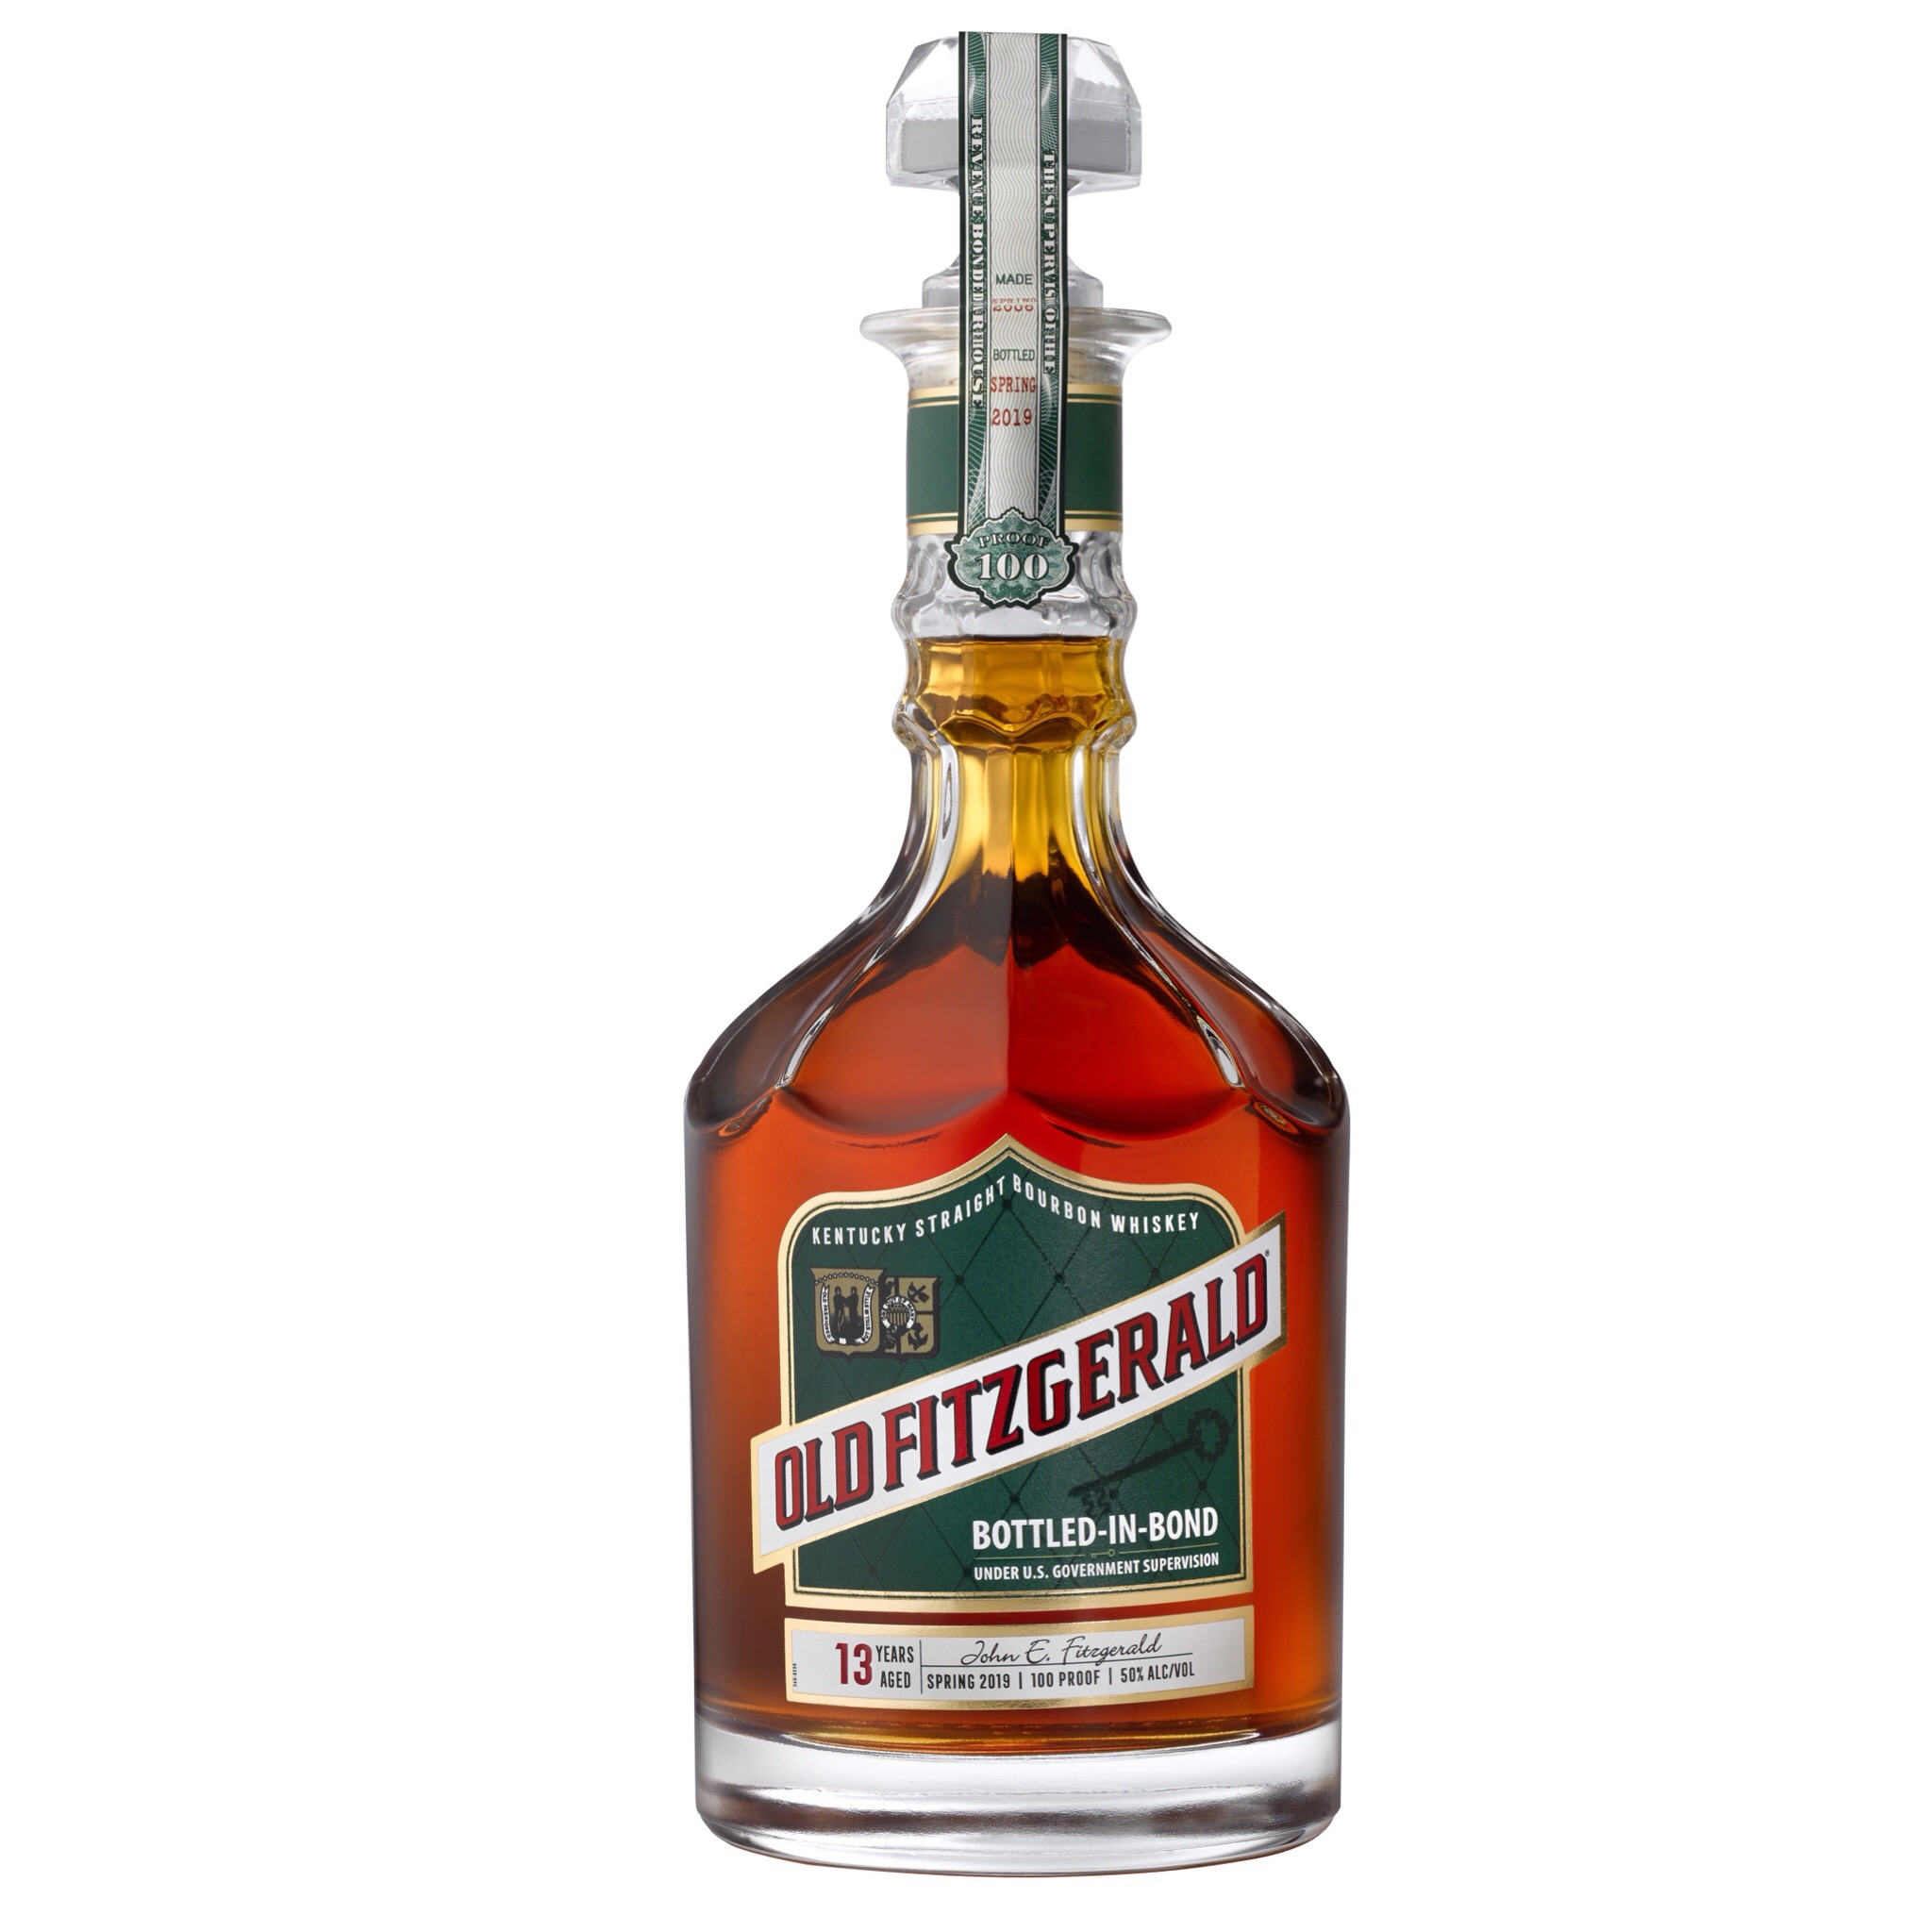 The Newest Old Fitzgerald BottledinBond Will Be the Oldest Yet The